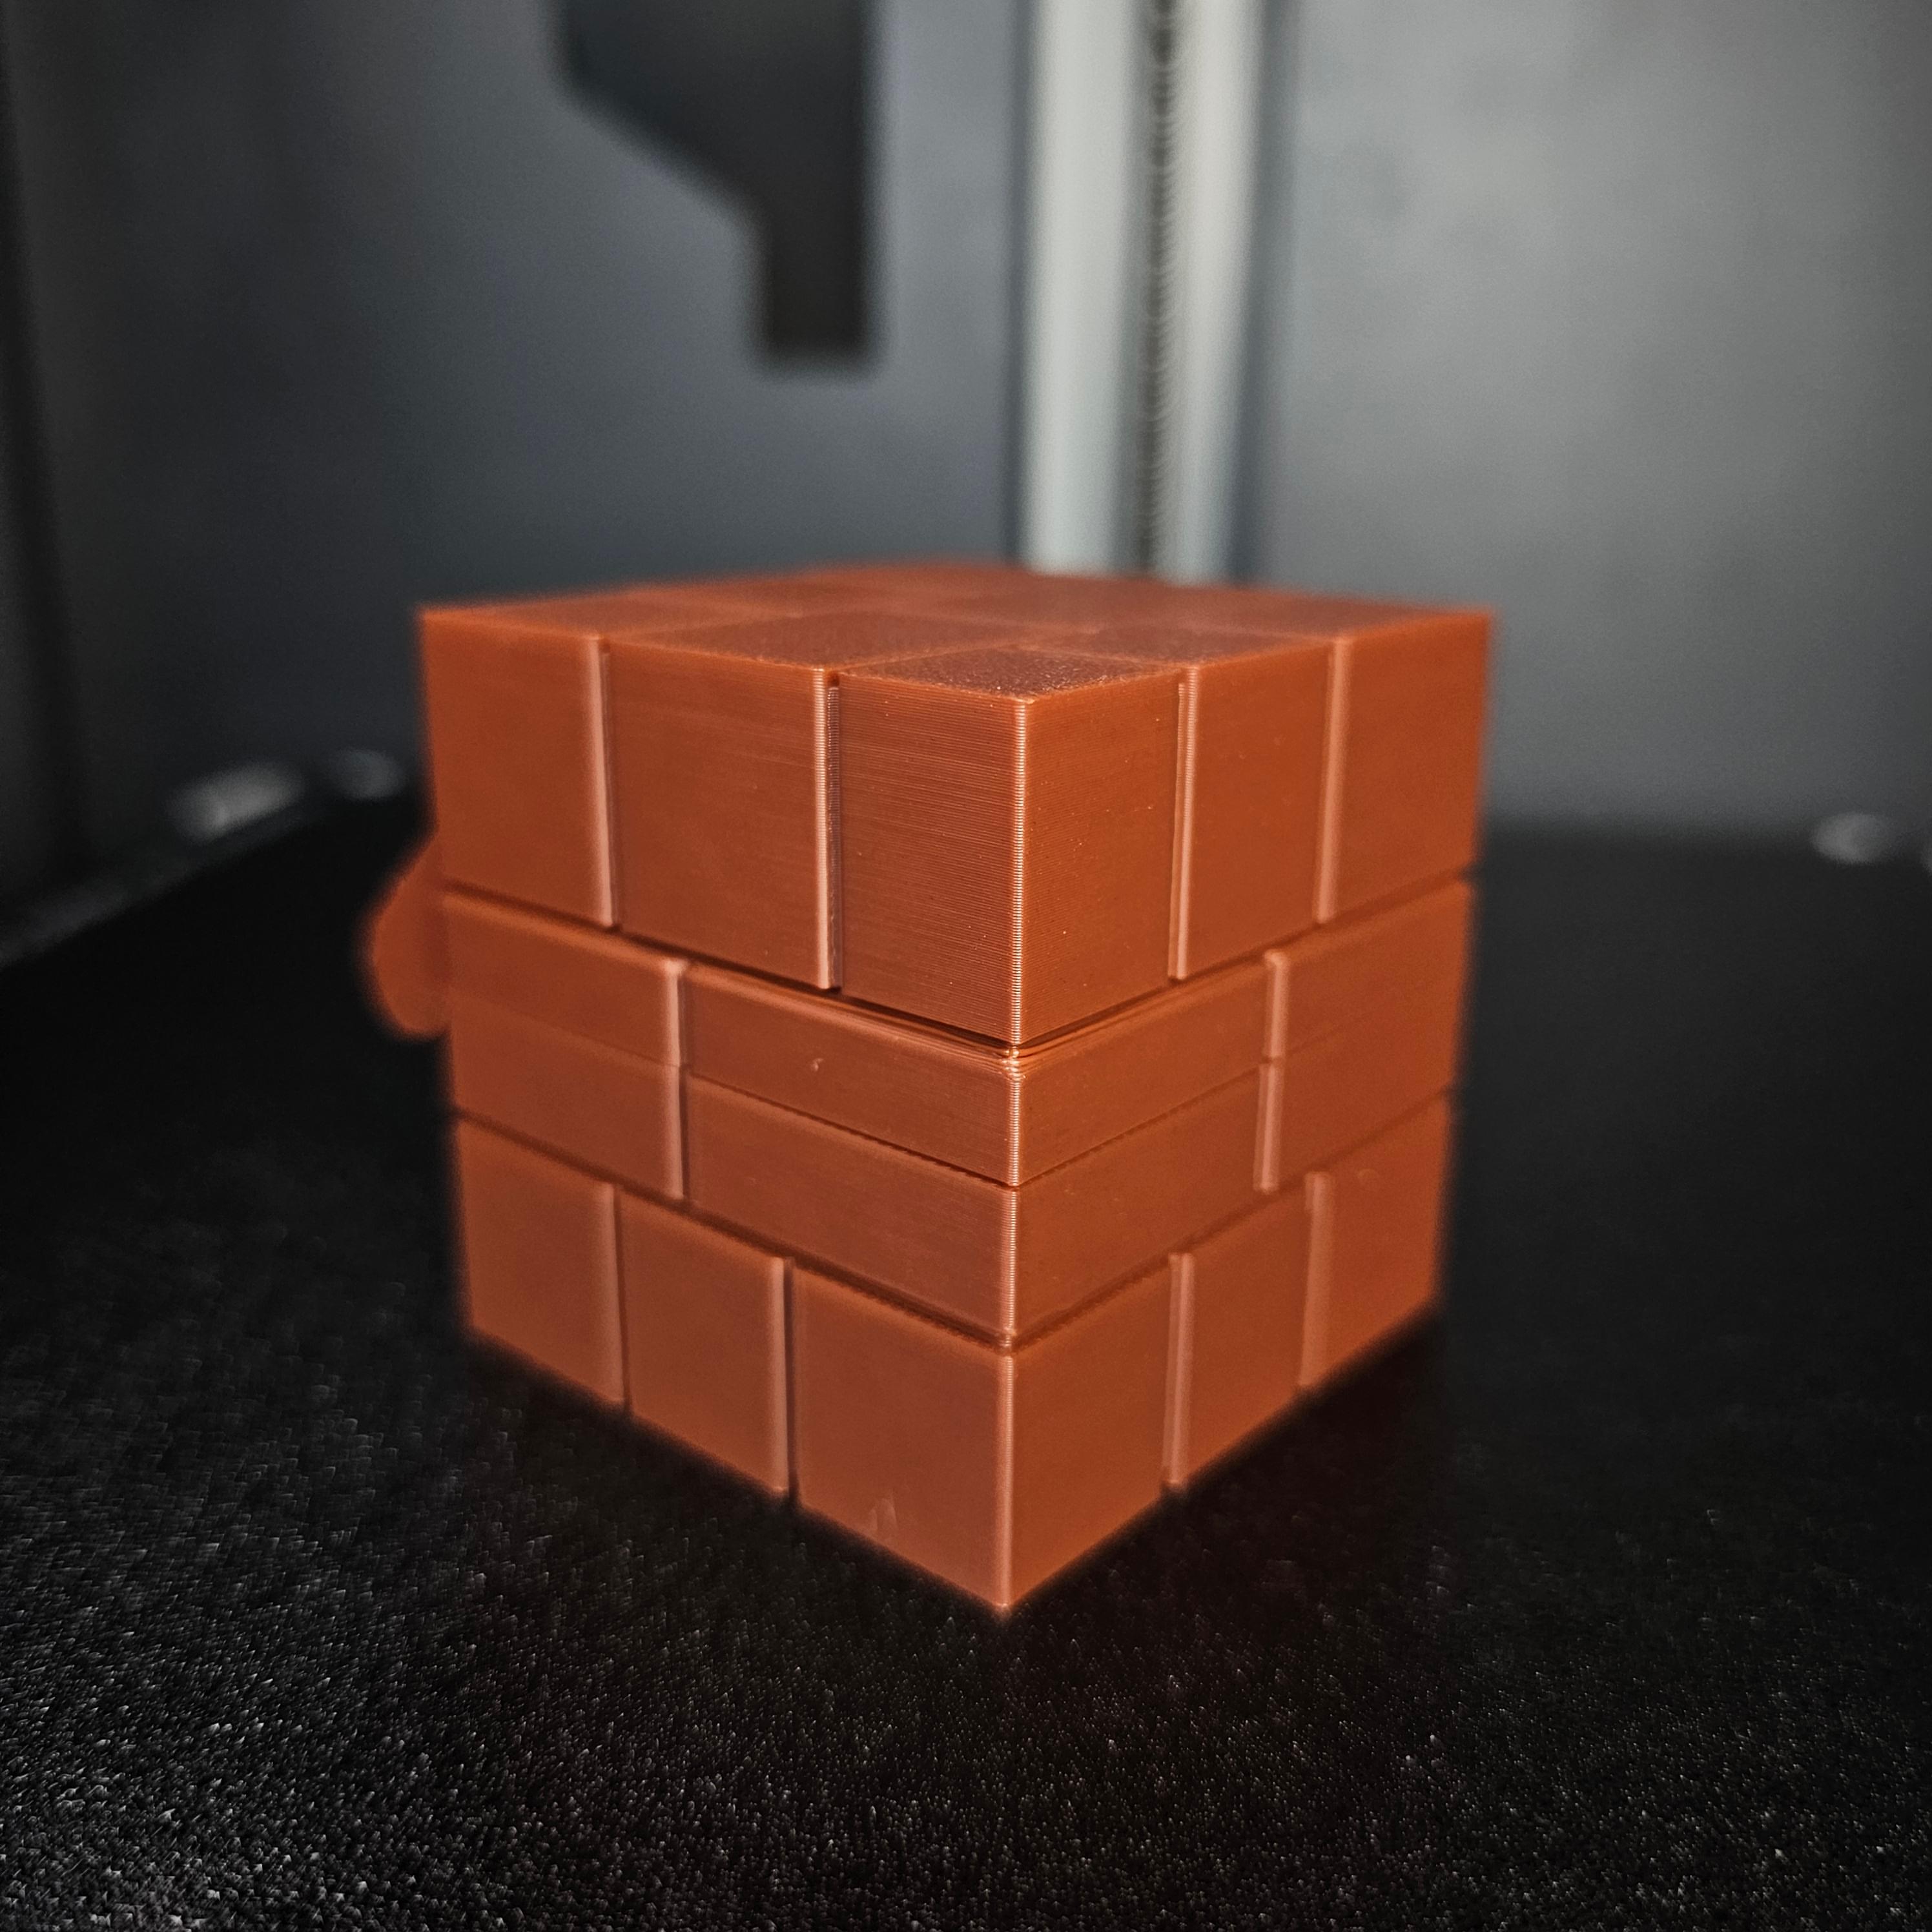 Mario Block Print-in-Place Container.stl 3d model